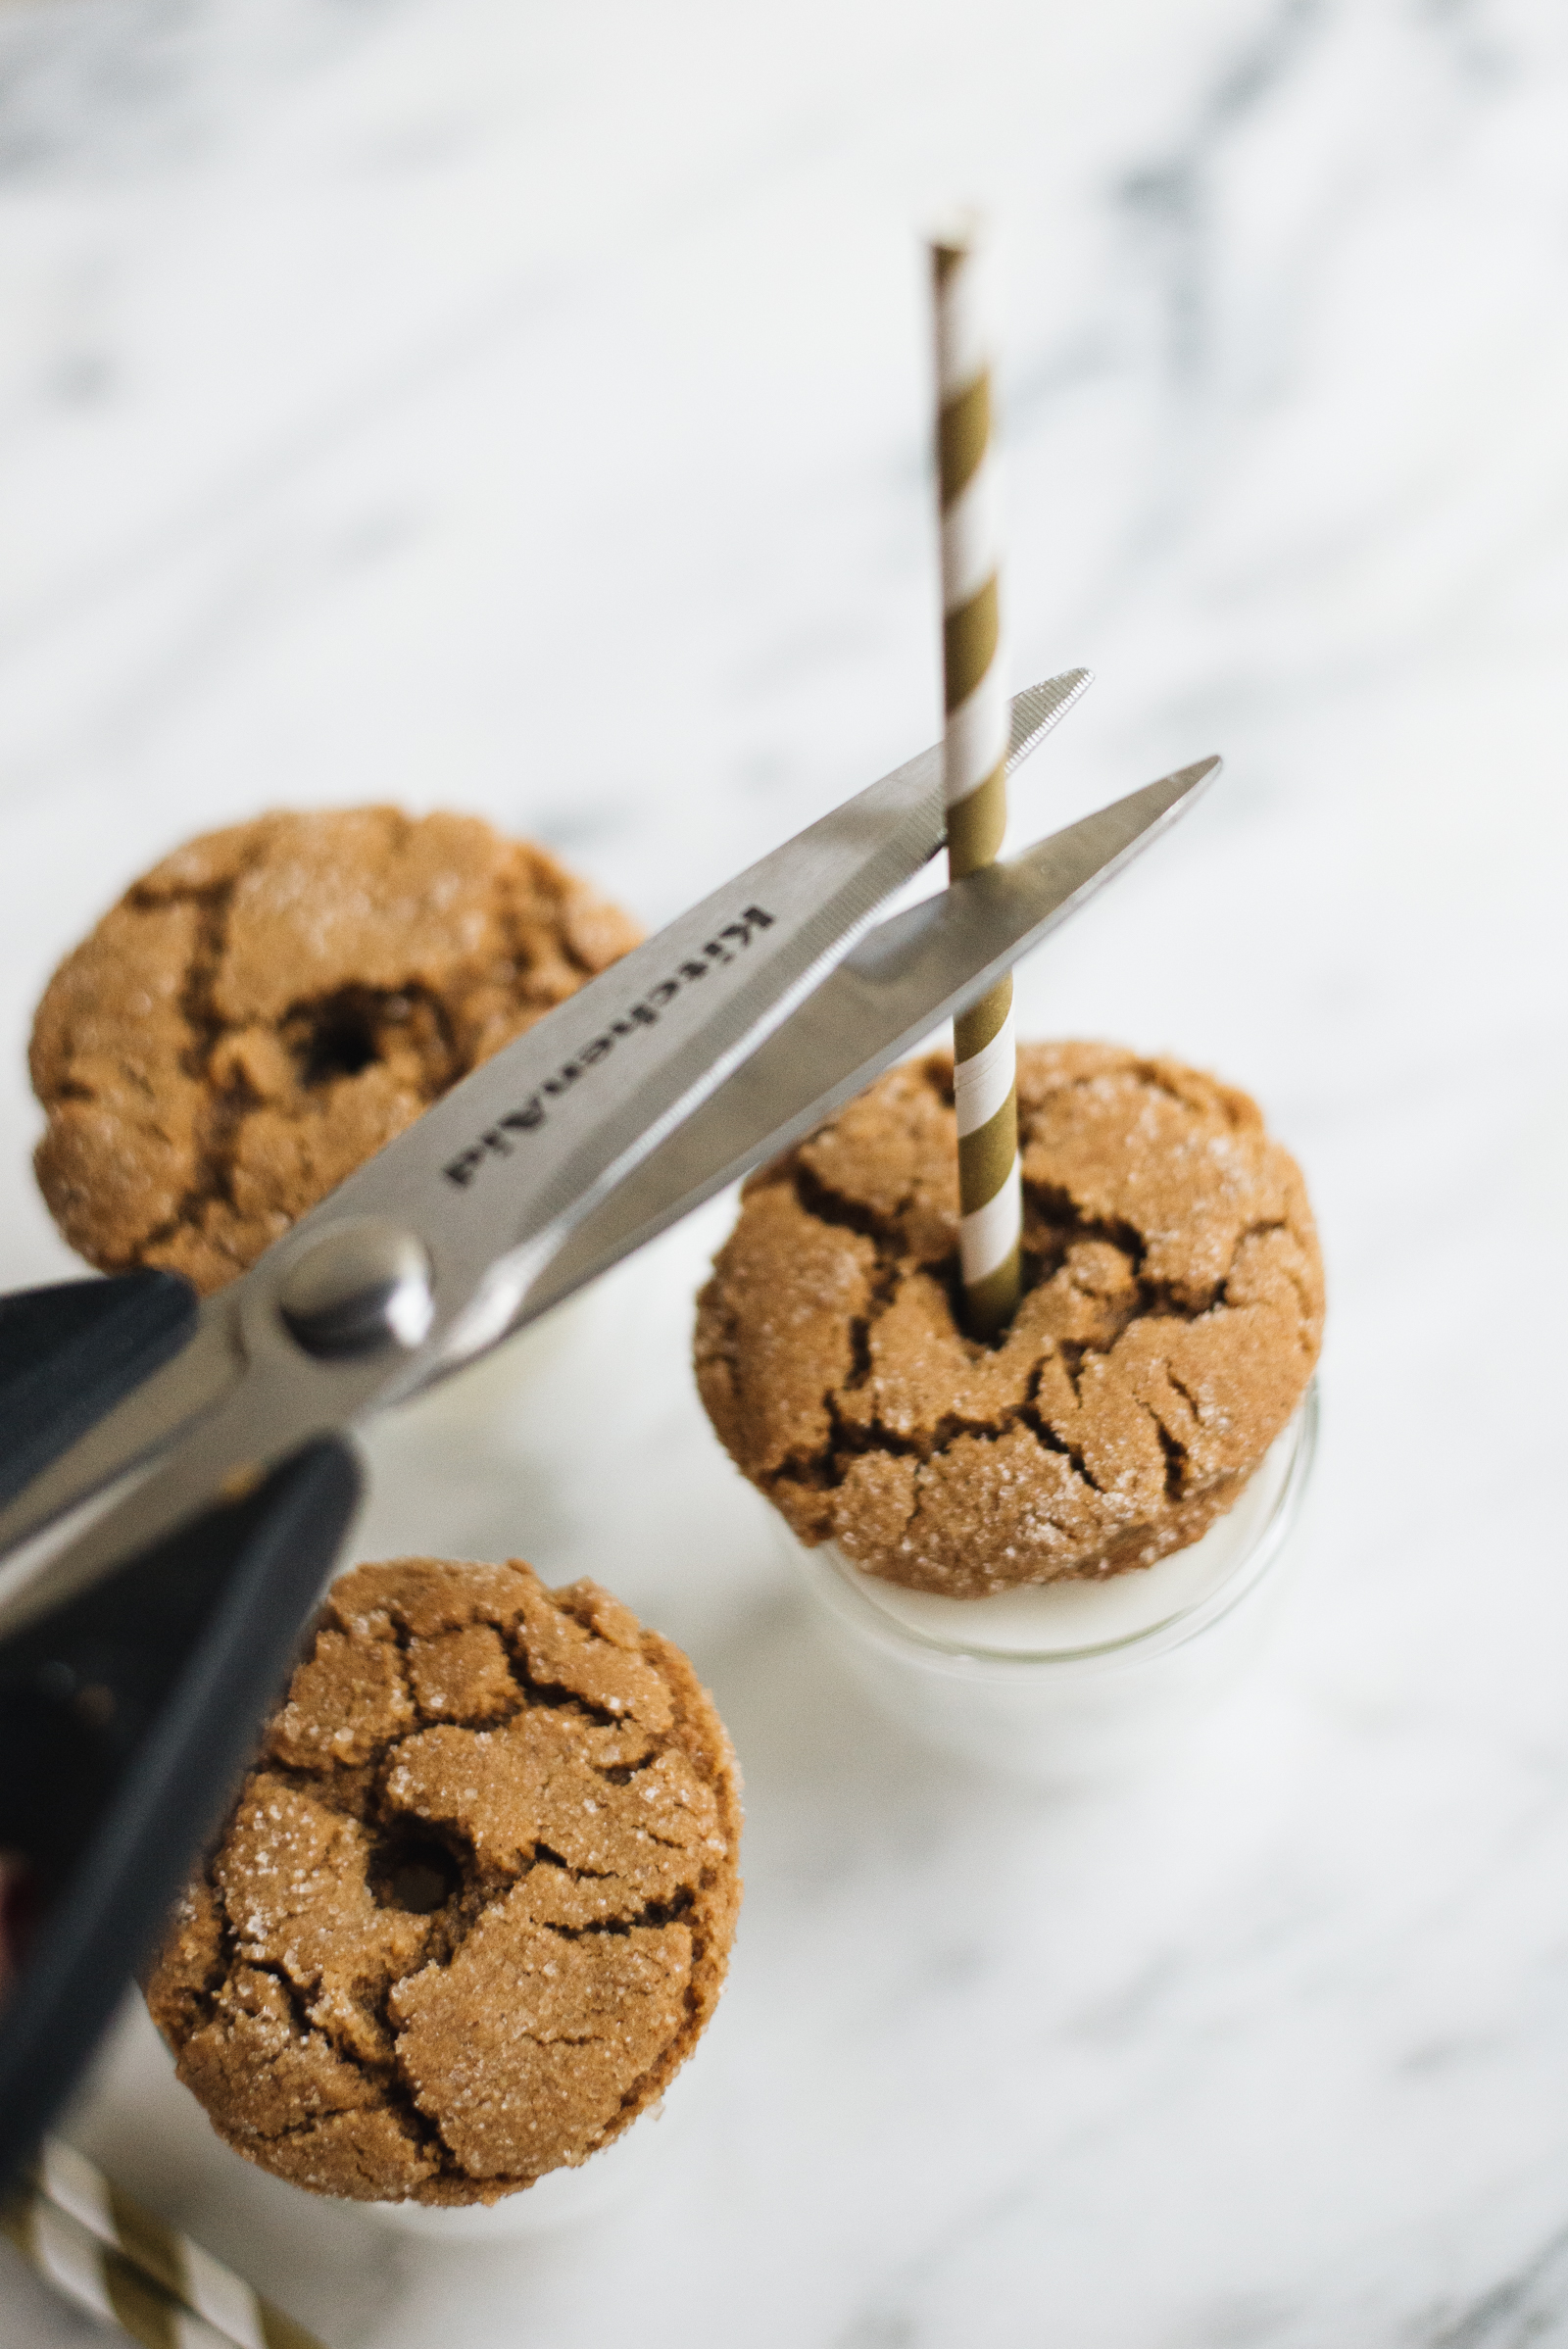 snip the gold striped straw with scissors for the gingersnap cookies